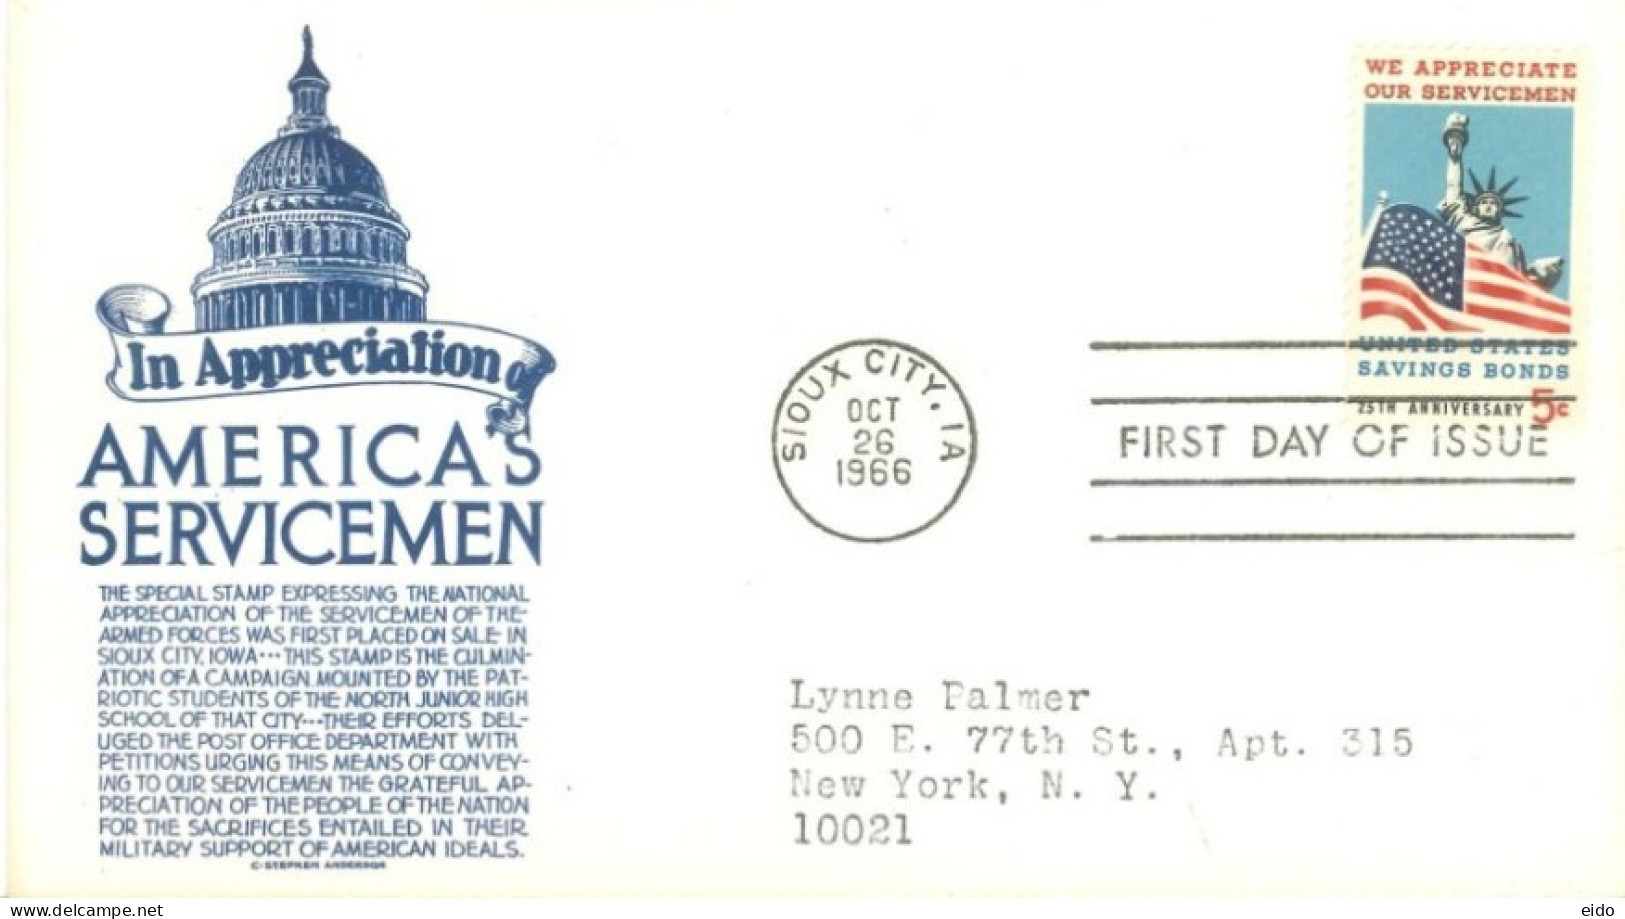 U.S.A.. -1966 -  FDC STAMP IN APPRECIATION OF AMERICA'S SERVICEMEN SENT TO NEW YORK. - Lettres & Documents